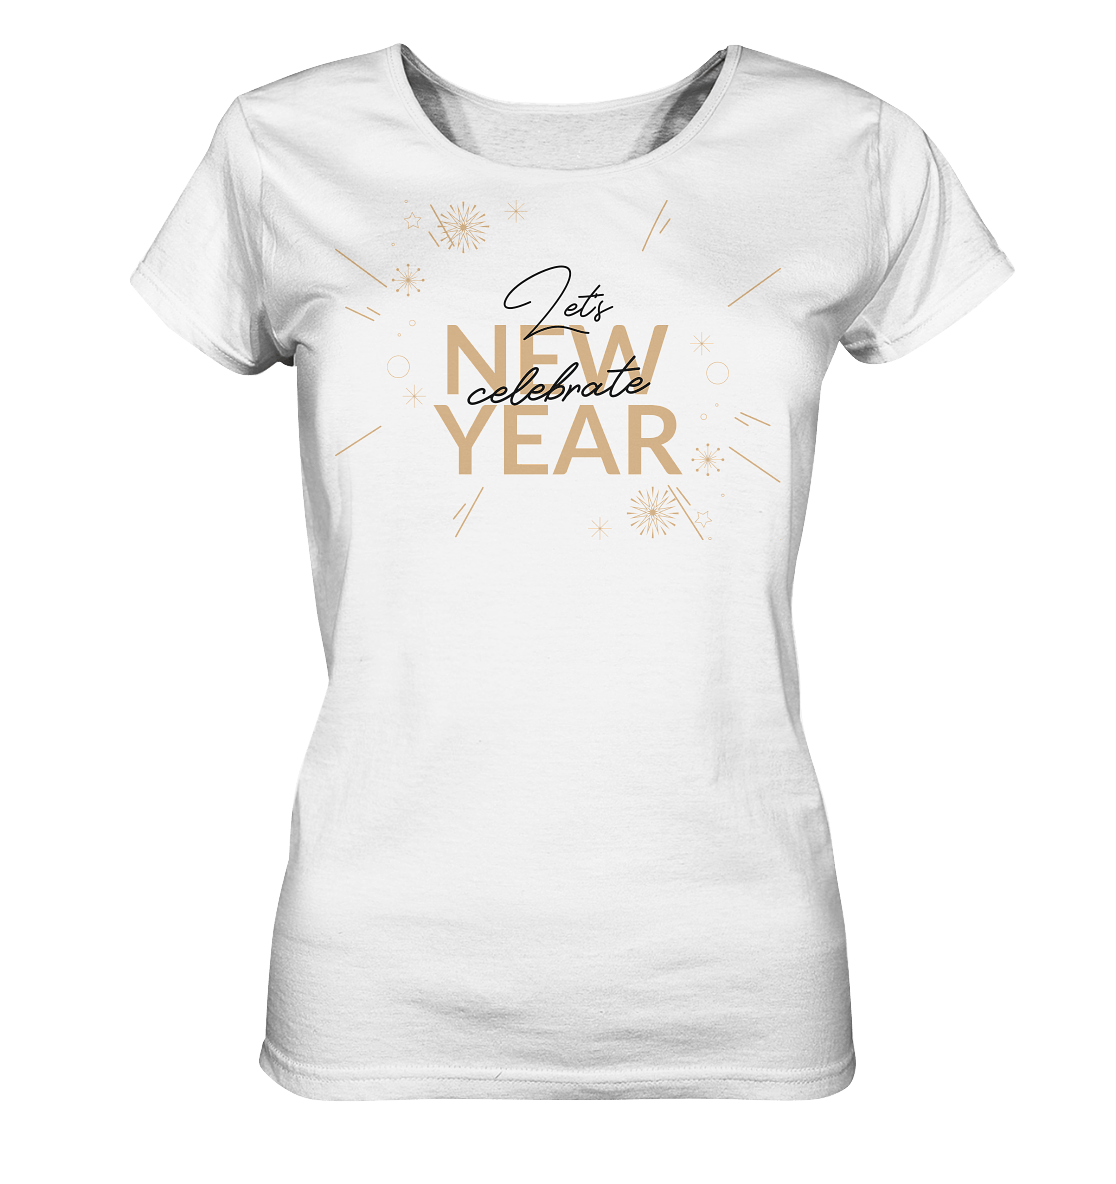 Damen Silvester T-Shirt in weiß New Year Let's celebrate